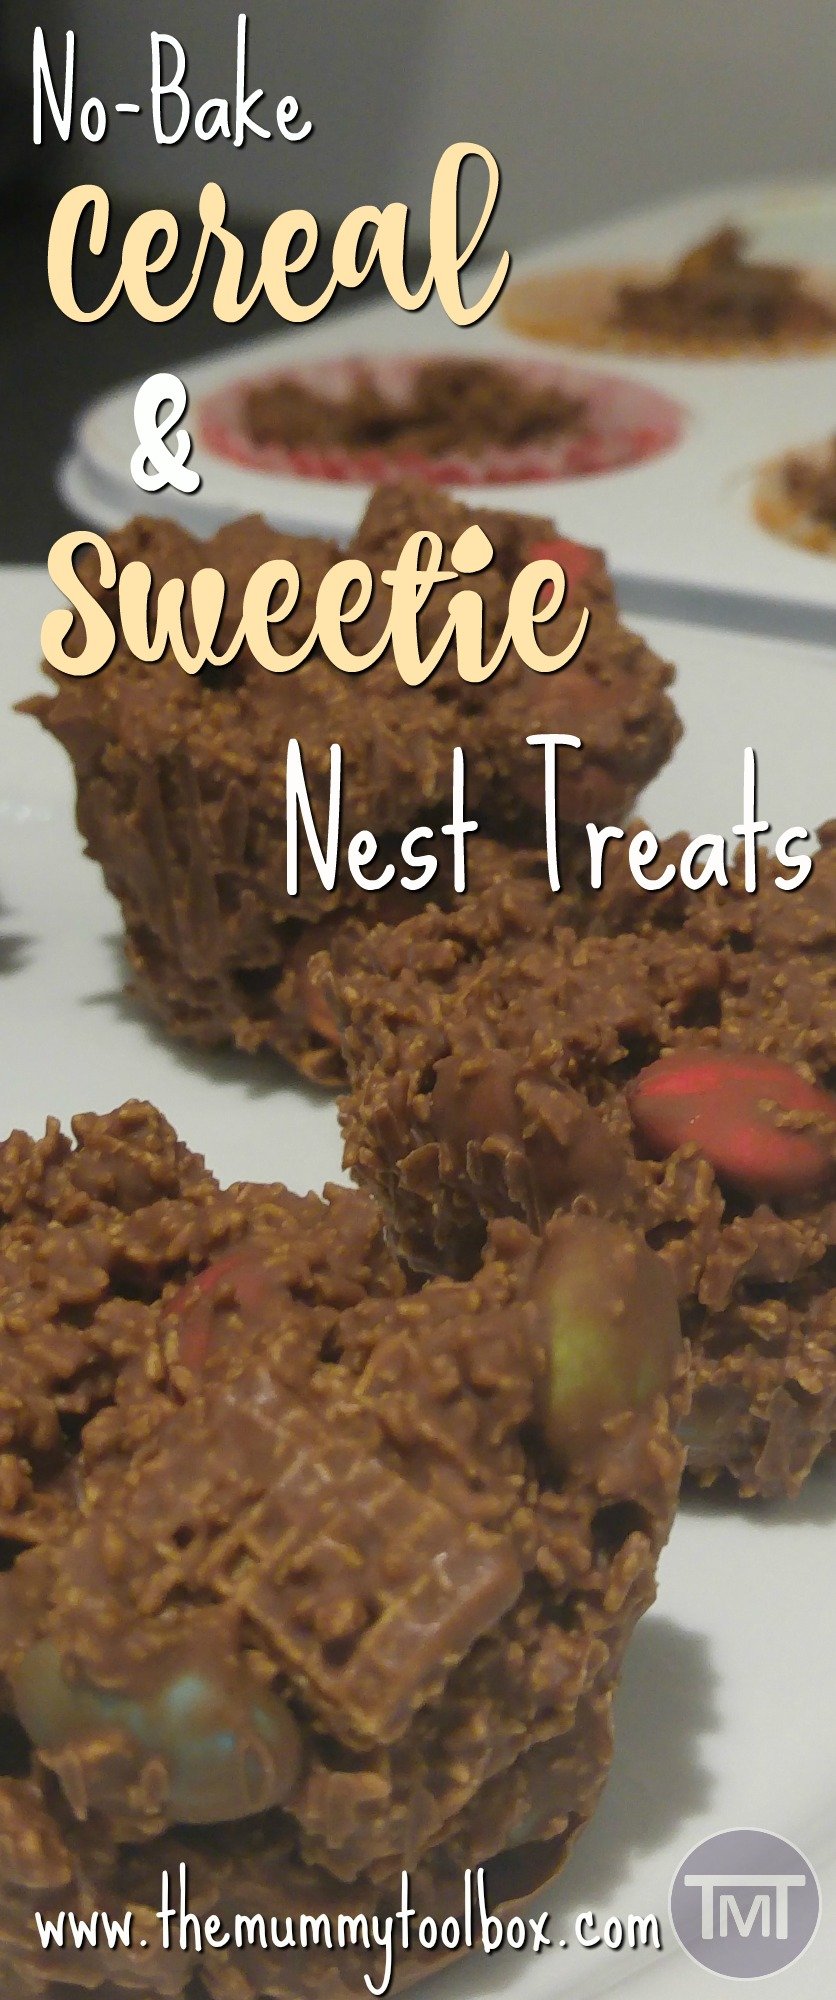 Don't let the cereal fool you, these sweetie nest treats are definitely not a healthy breakfast alternative but they definitely are delicious!